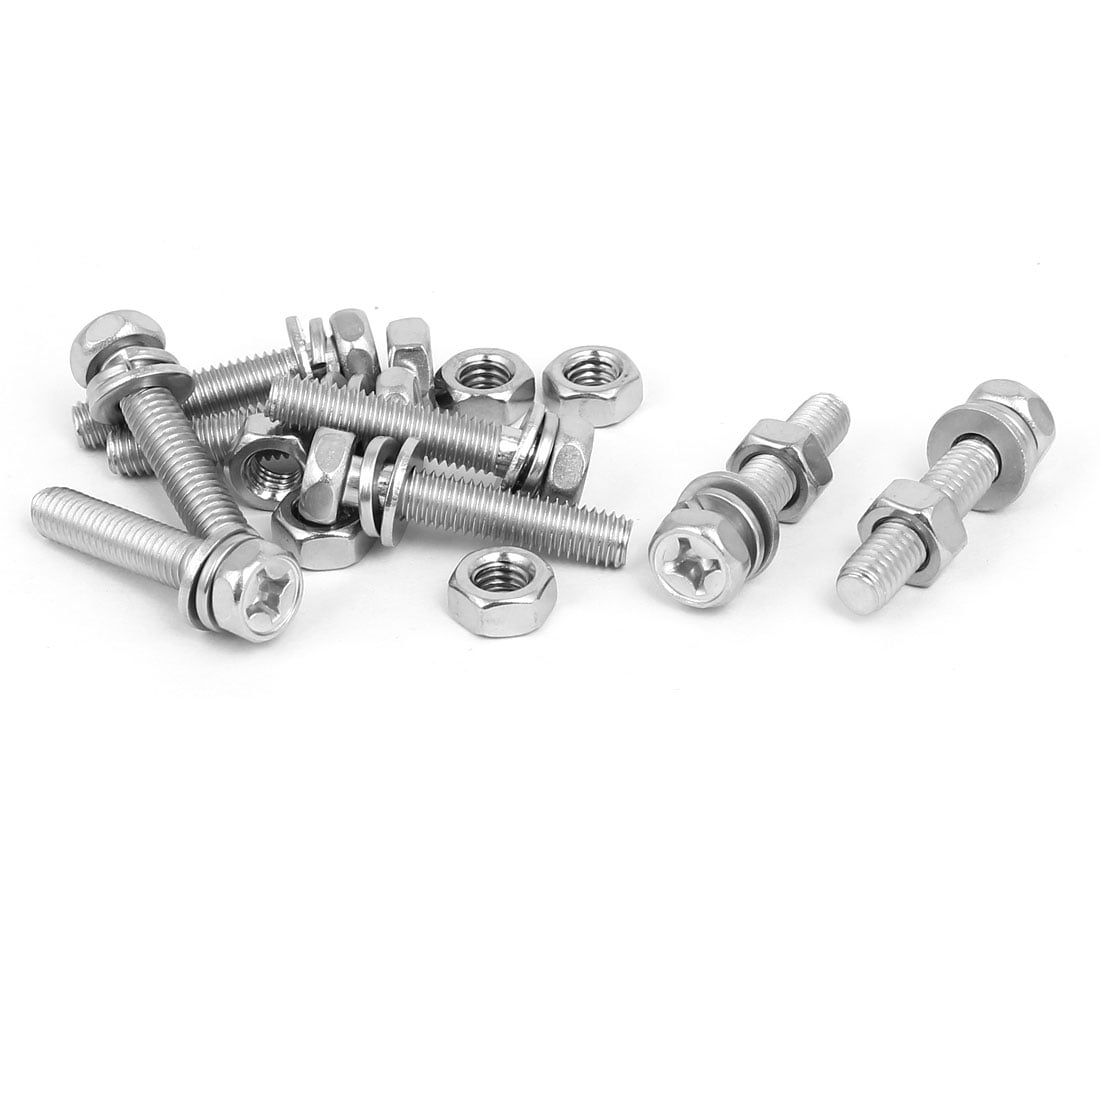 NUT & WASHERS HEXAGON BOLT M8 X 30 A2 STAINLESS X 6 